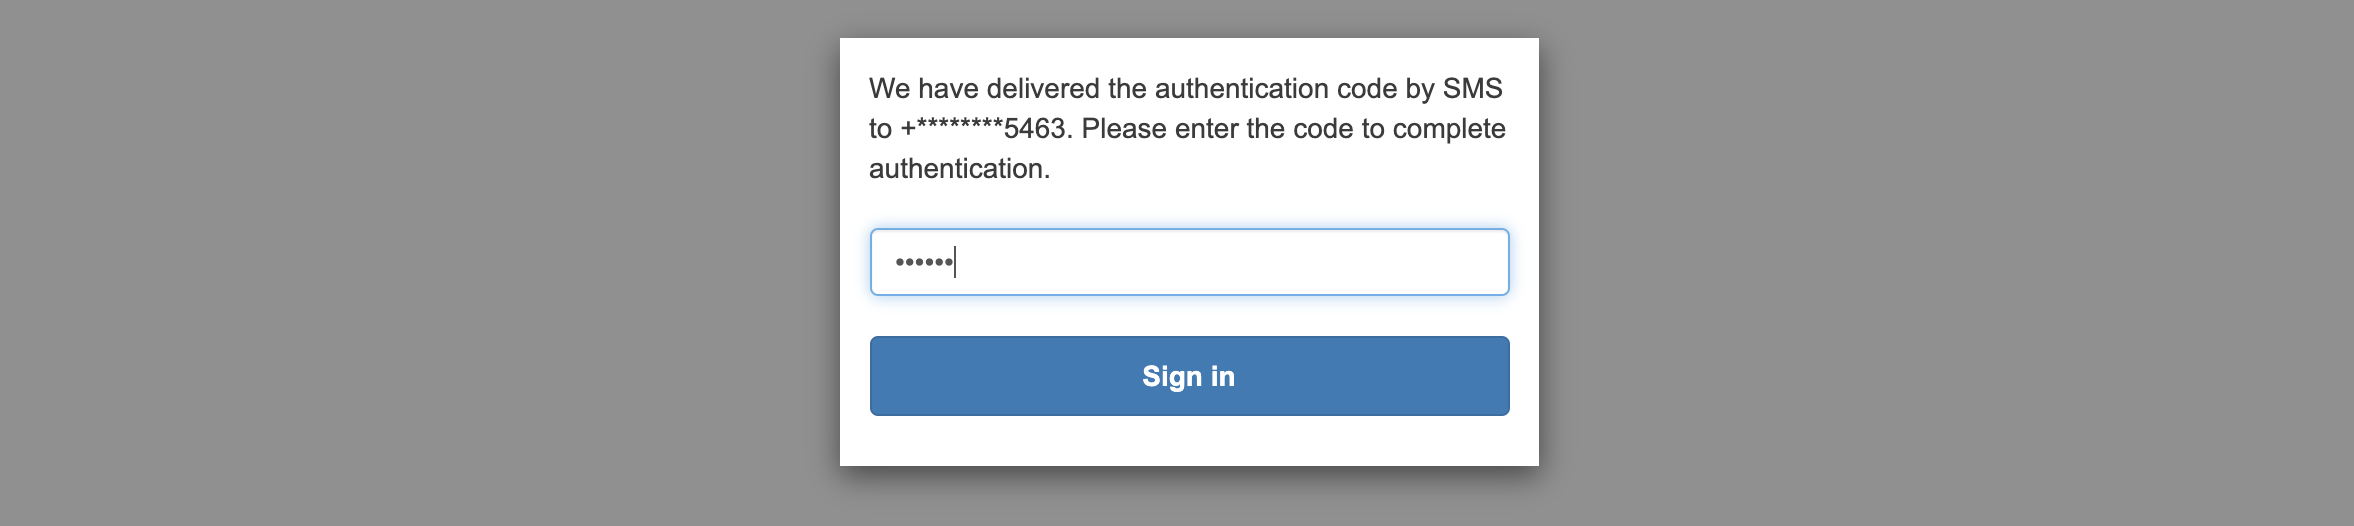 Enter your Multi-Factor Authentication code from the SMS message